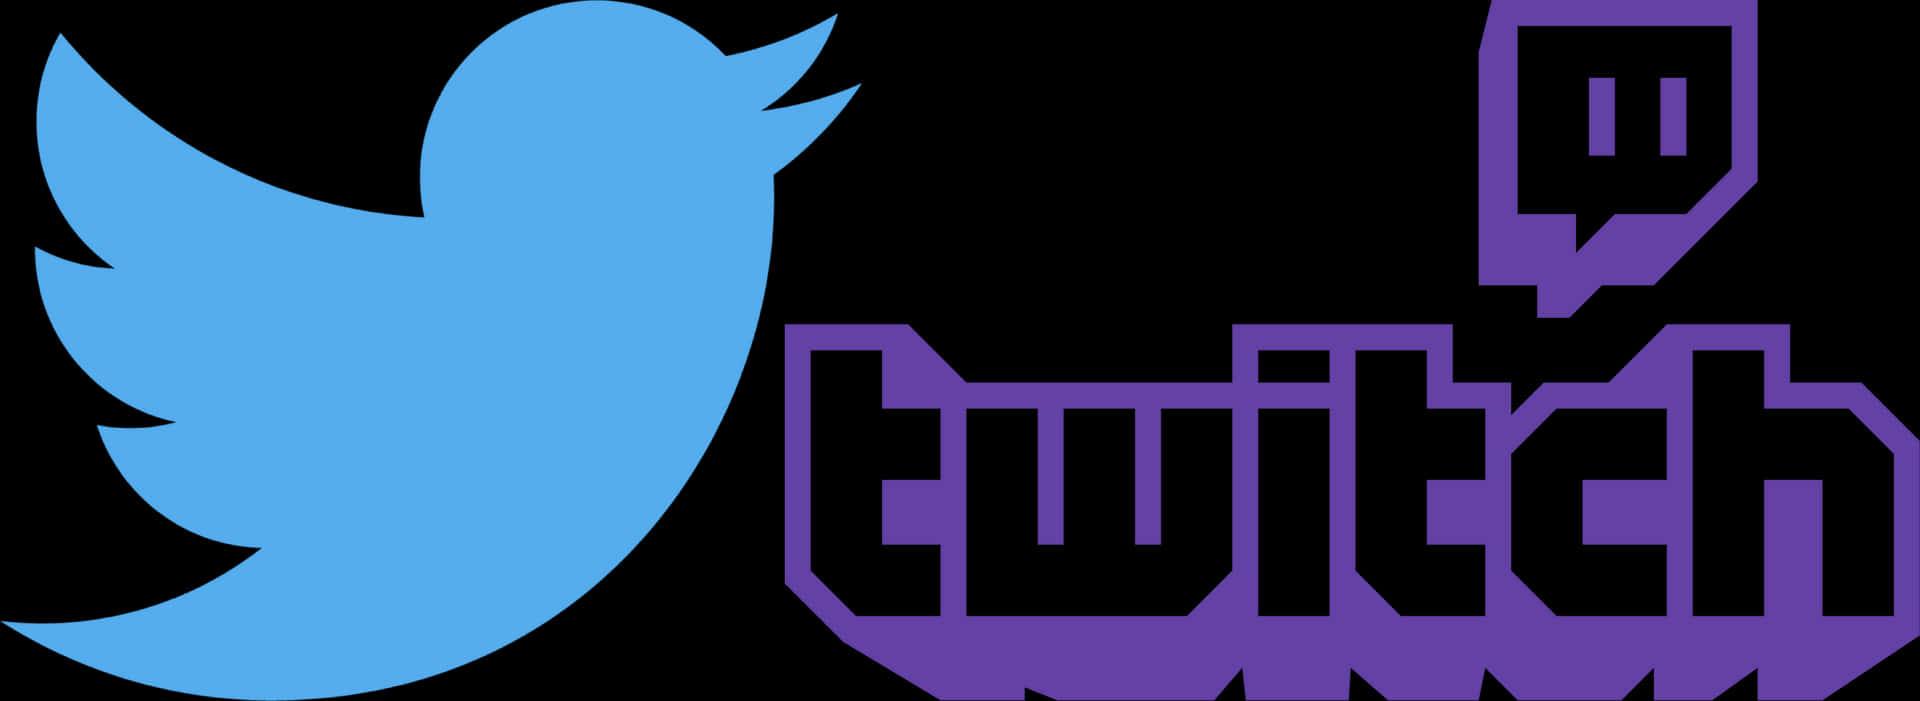 Twitter Twitch Logos Combined PNG image